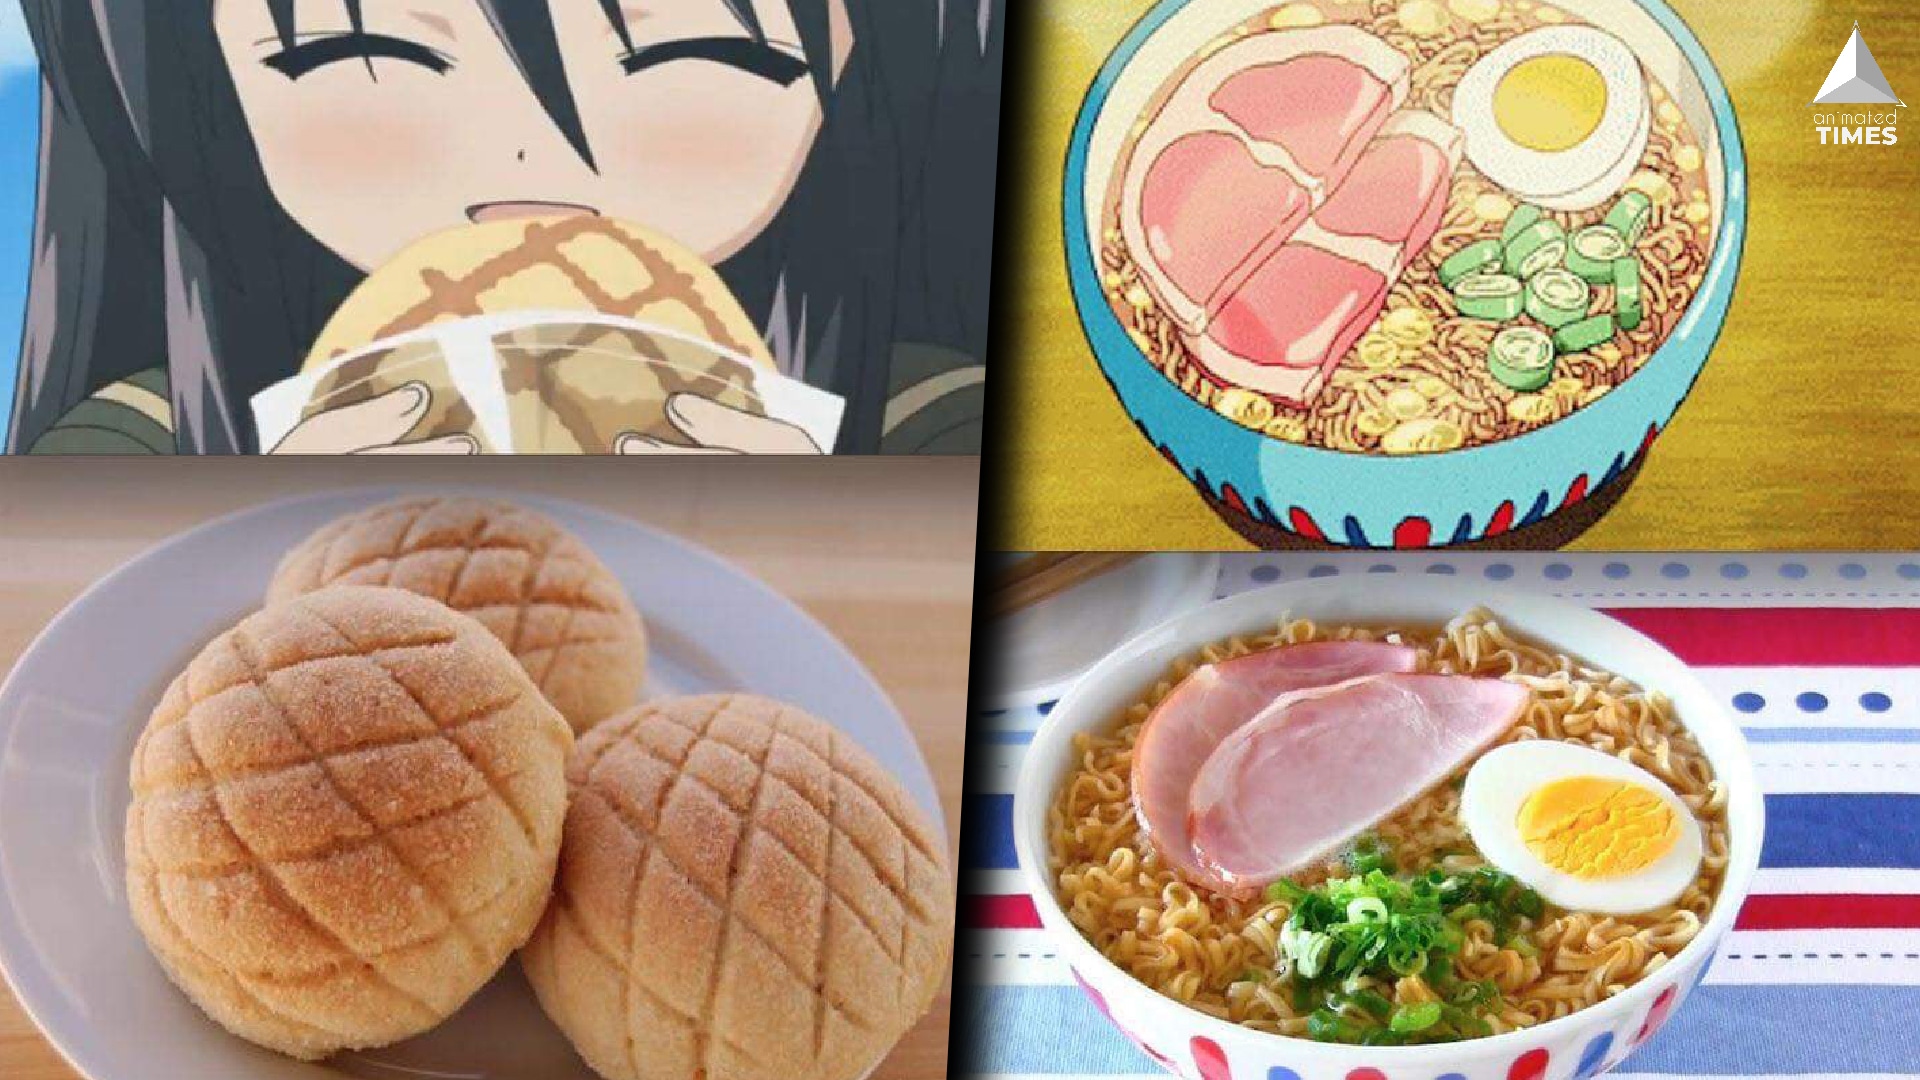 World’s Greatest Anime Studio’s Food Illustrations Look Deceptively Delicious (Even More So Than Real Life))